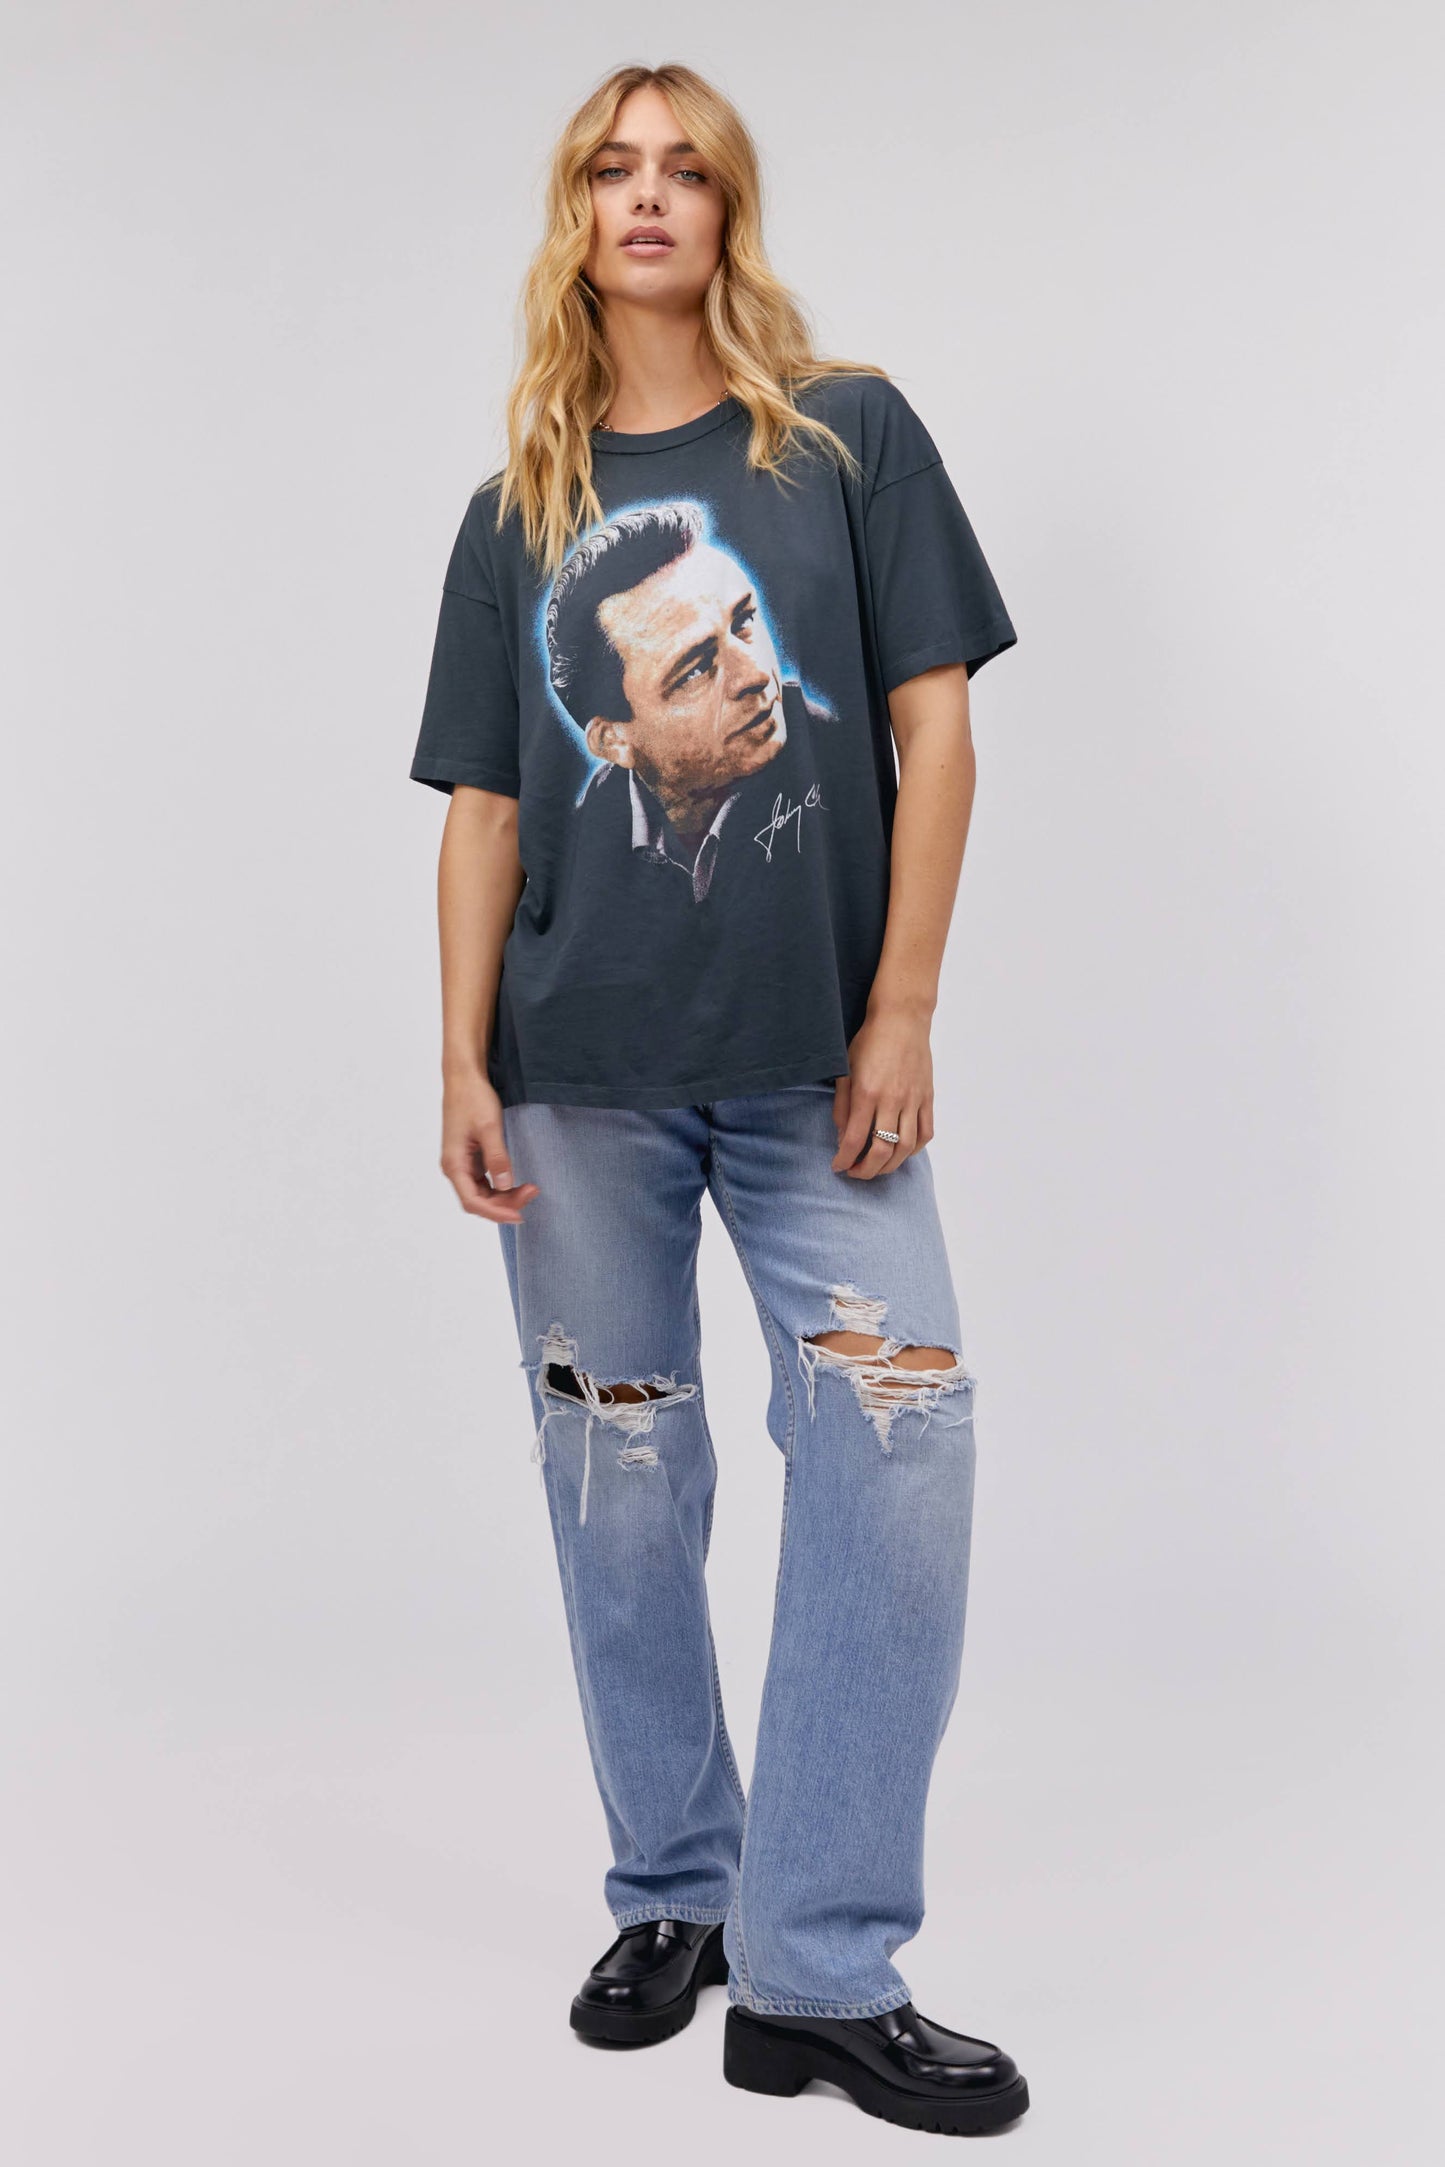 A blonde-haired model featuring a black tee designed with a portrait of Johnny Cash and stamped with 'Cash' at the back.